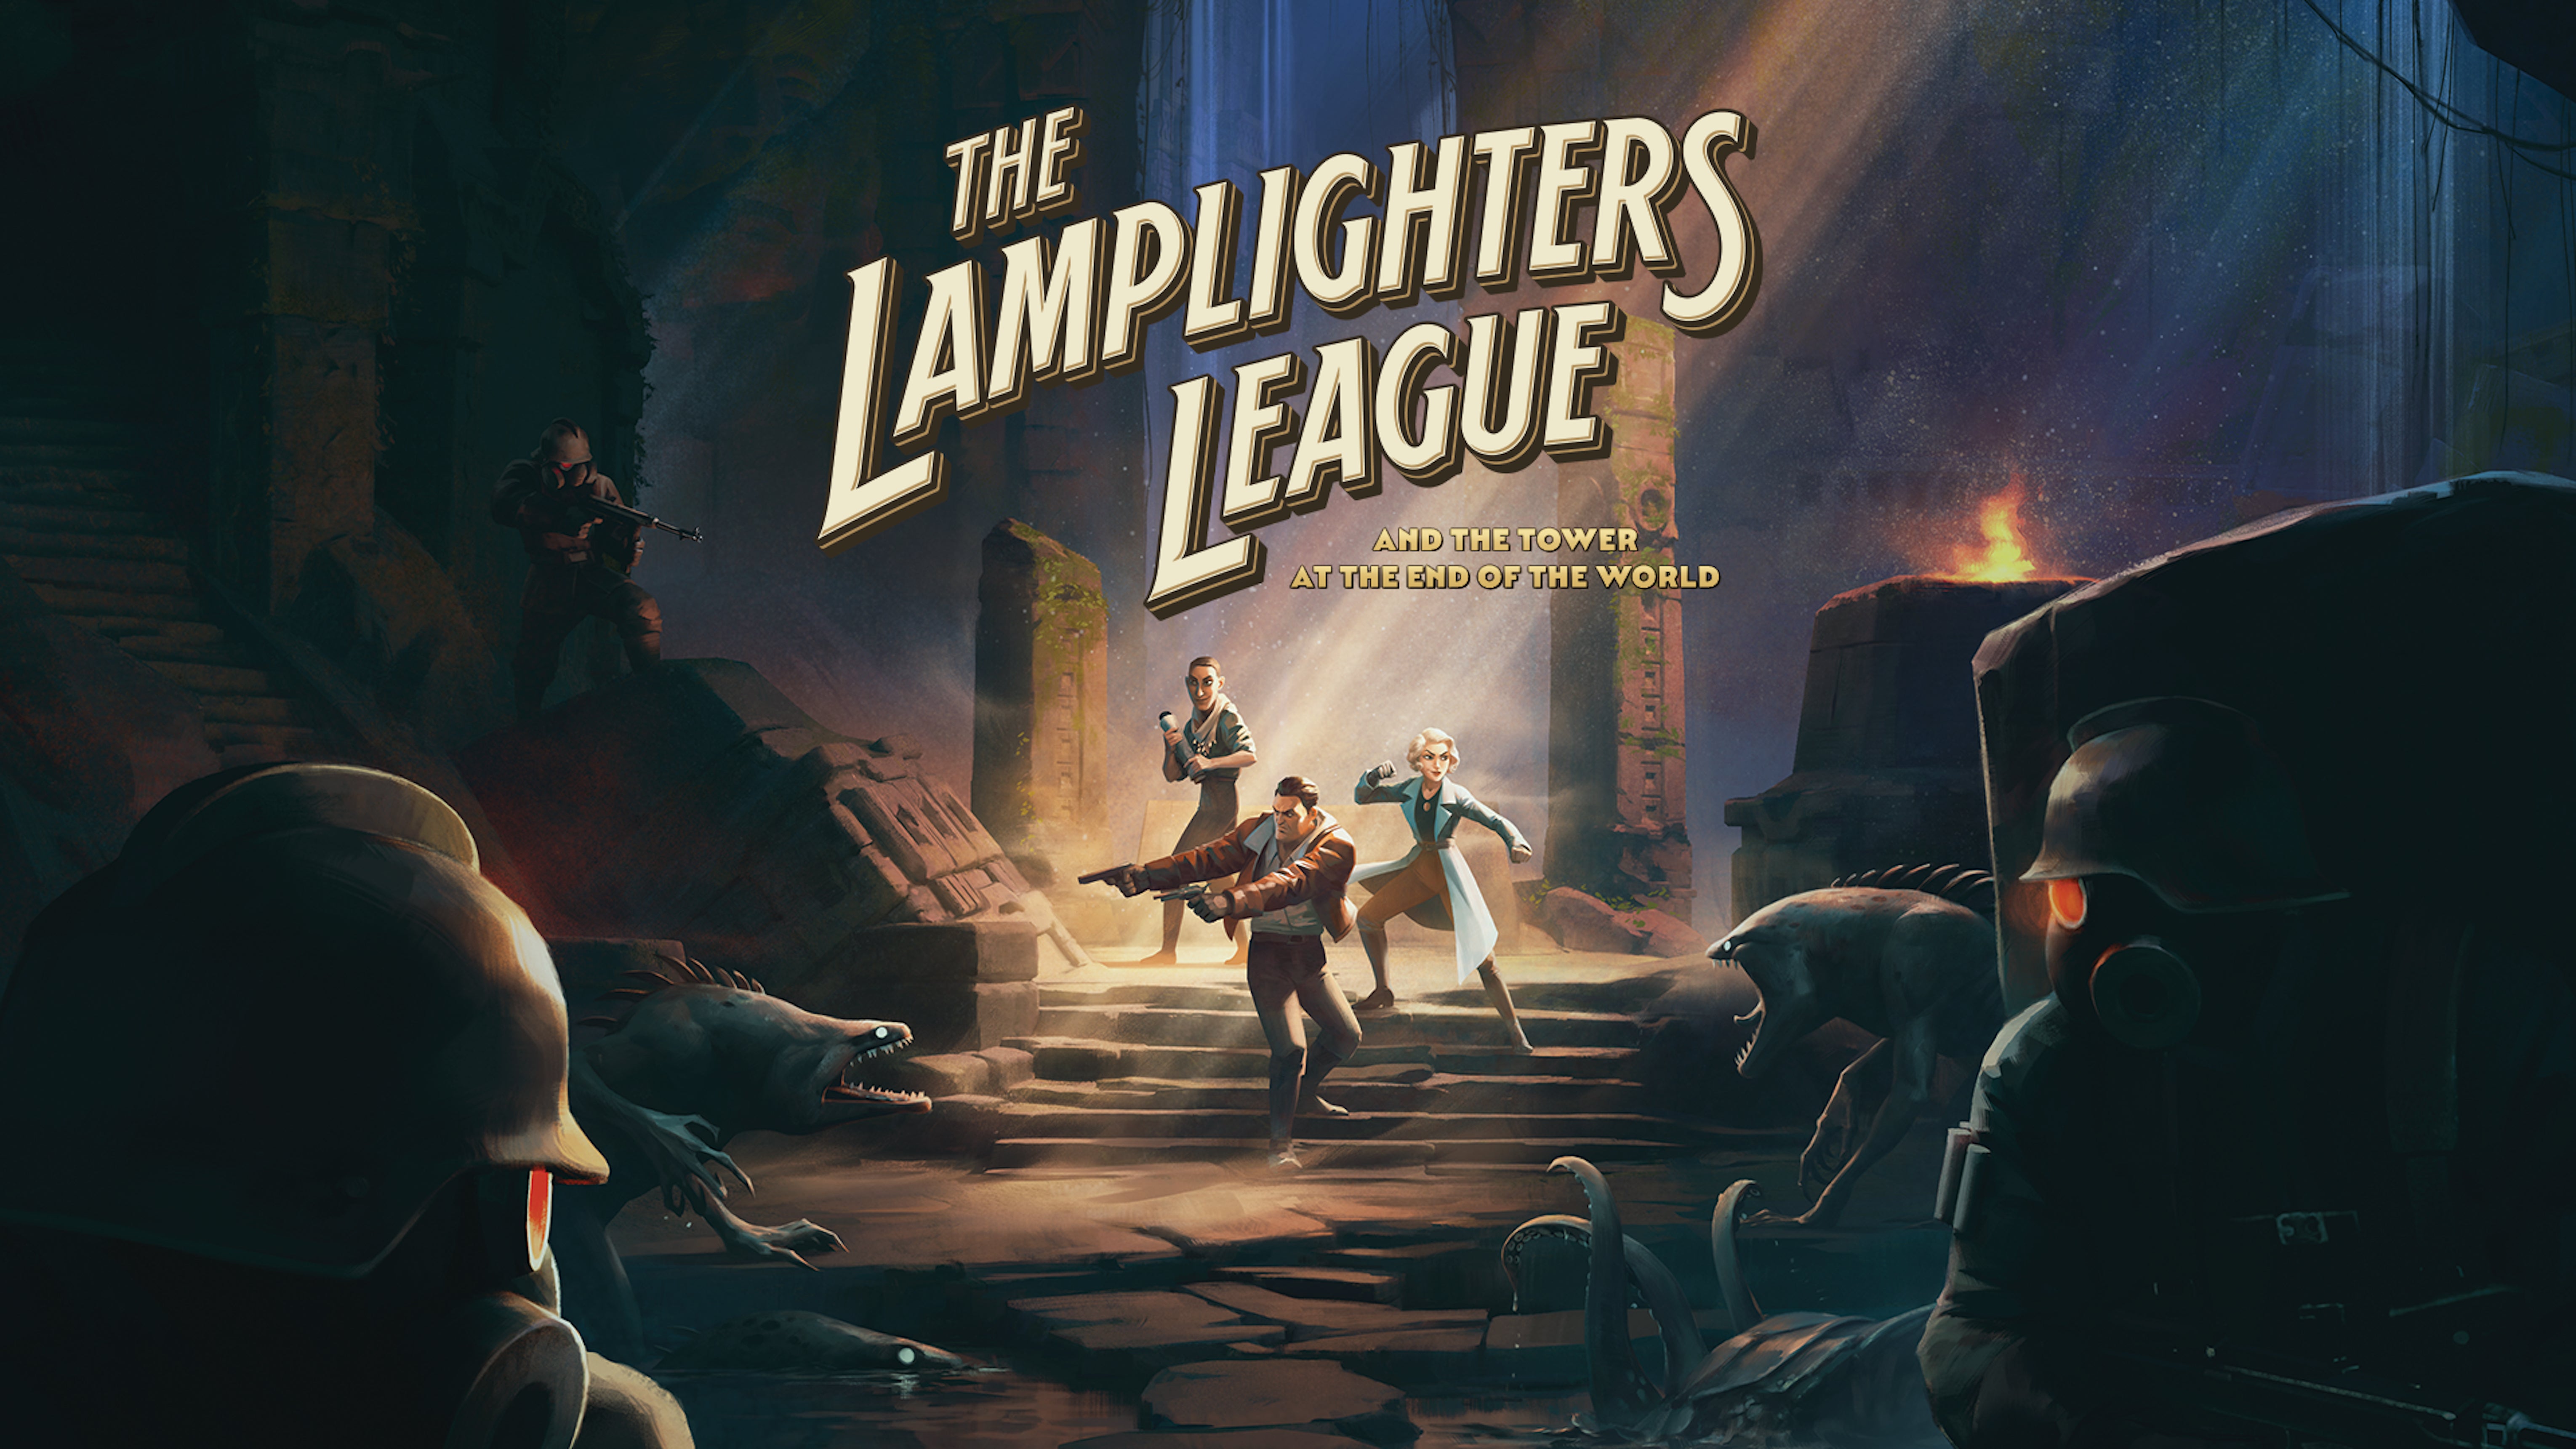 A group of shady soldiers stalk our heroes in The Lamplighters League